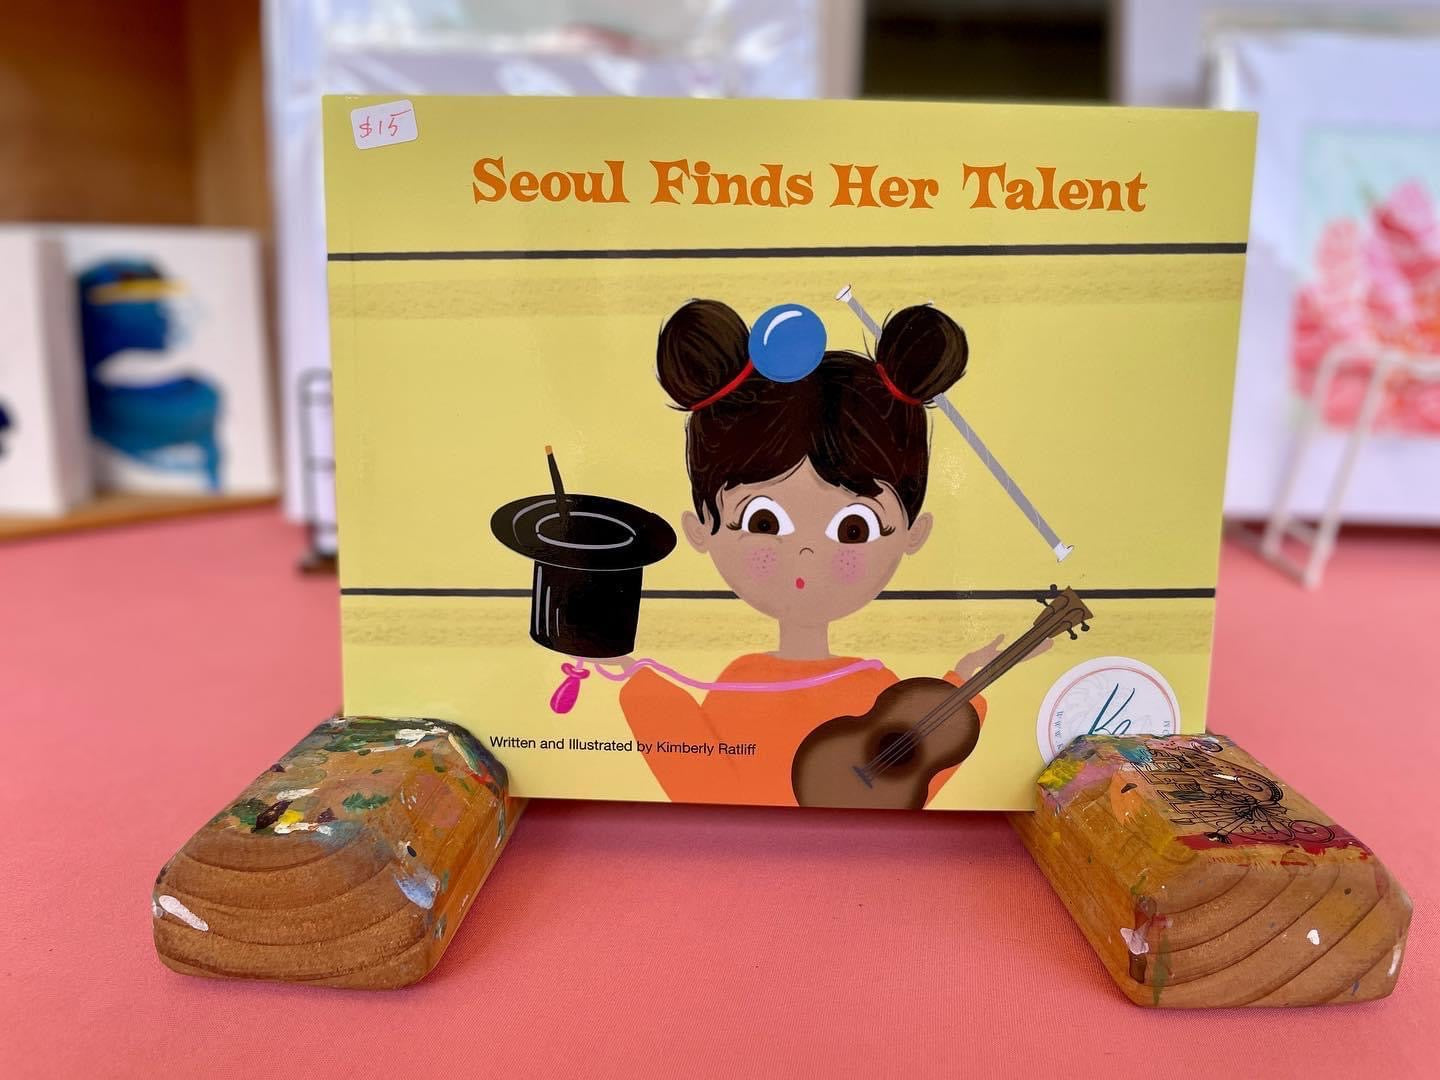 Seoul Finds Her Talent